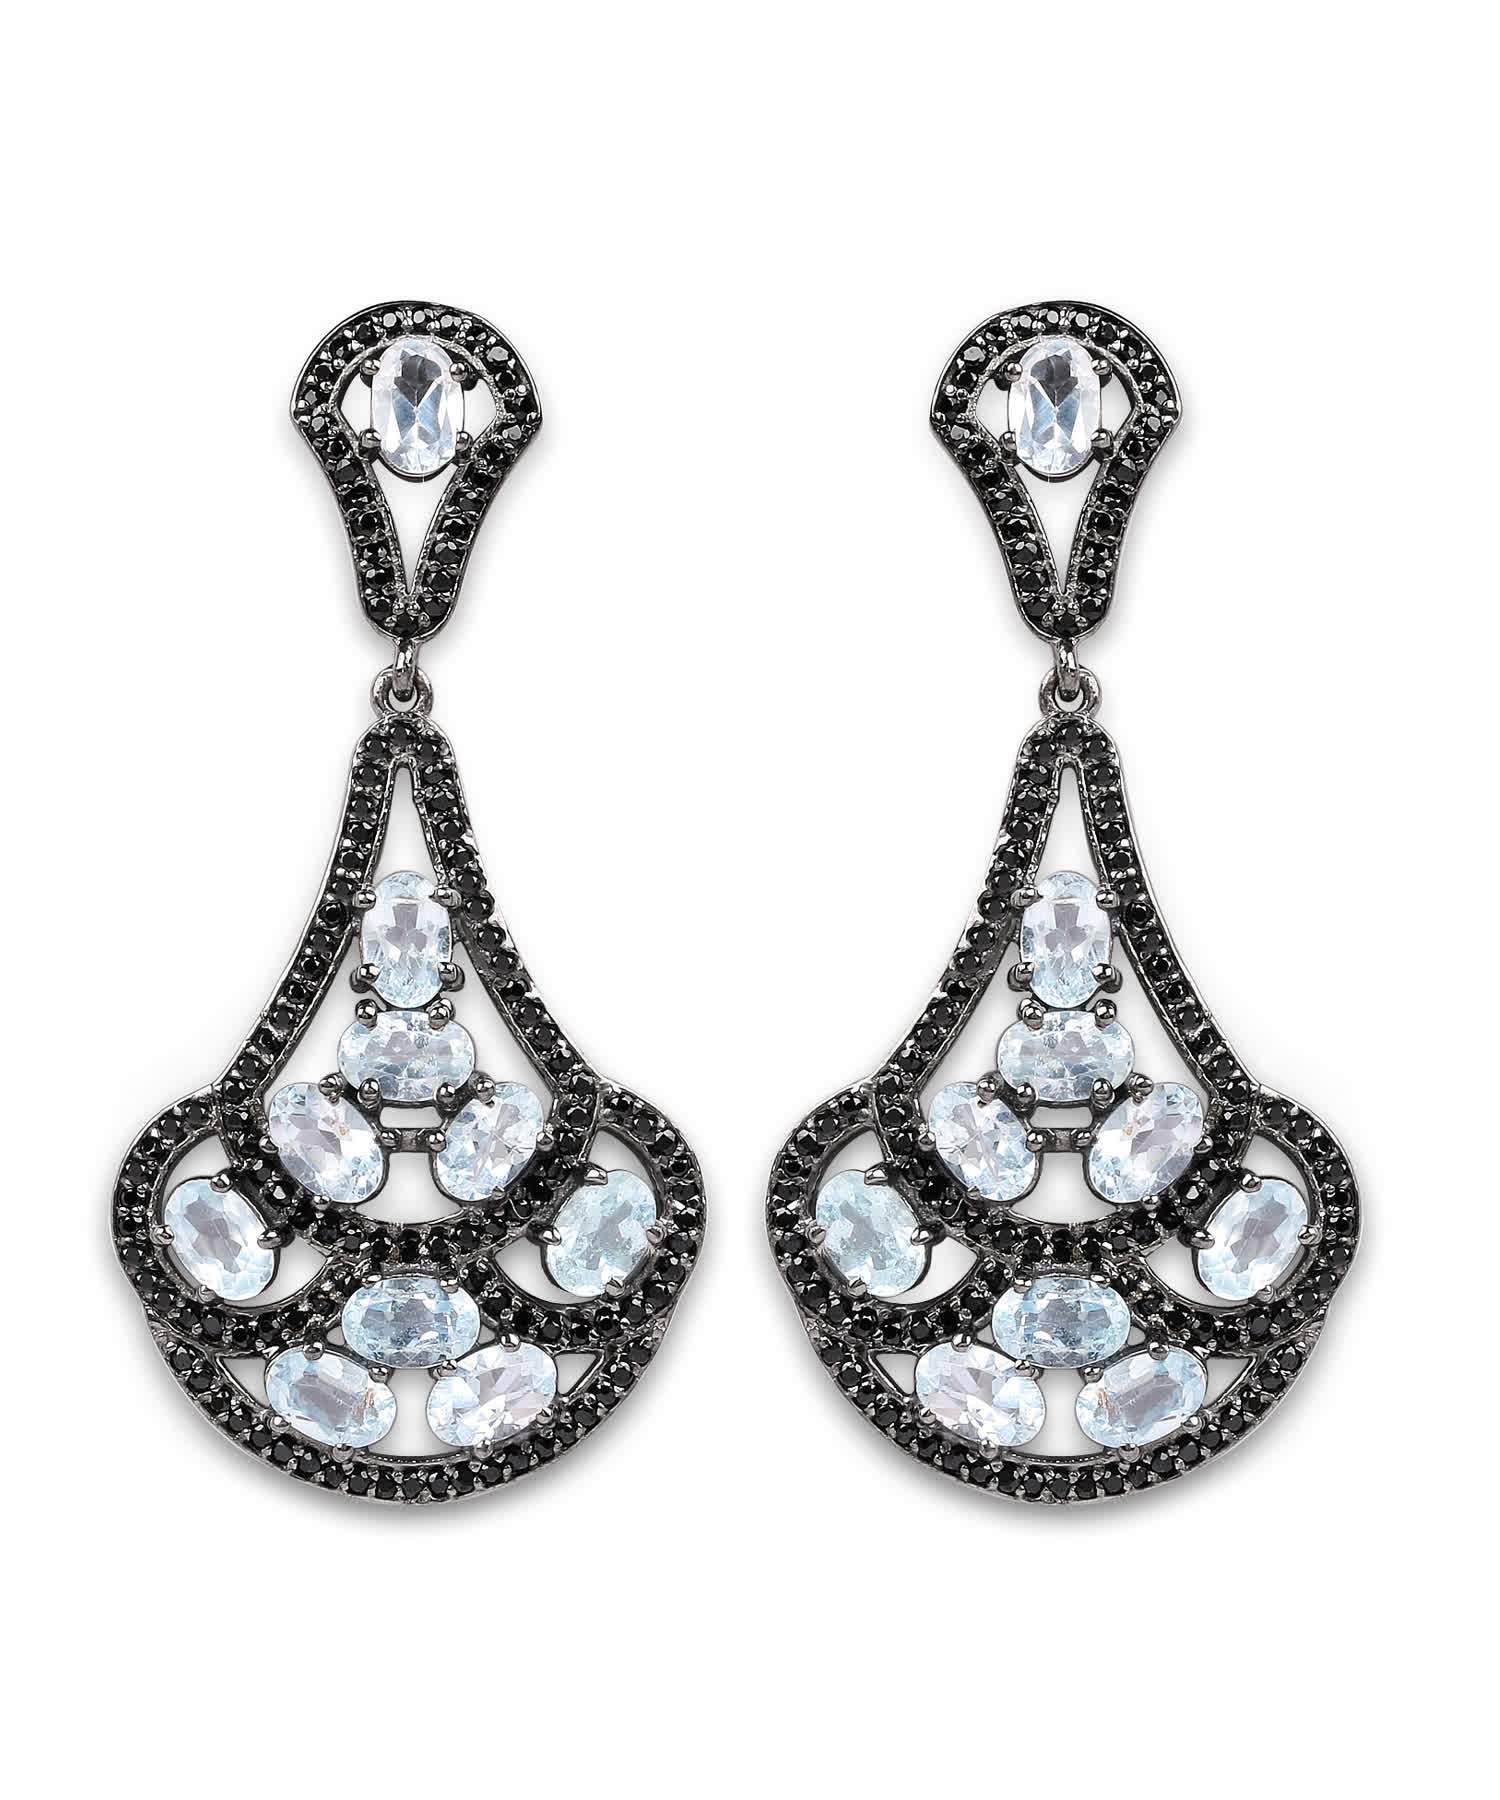 12.19ctw Natural Sky Blue Topaz and Black Spinel Rhodium Plated 925 Sterling Silver Antique Style Dangle Earrings View 1